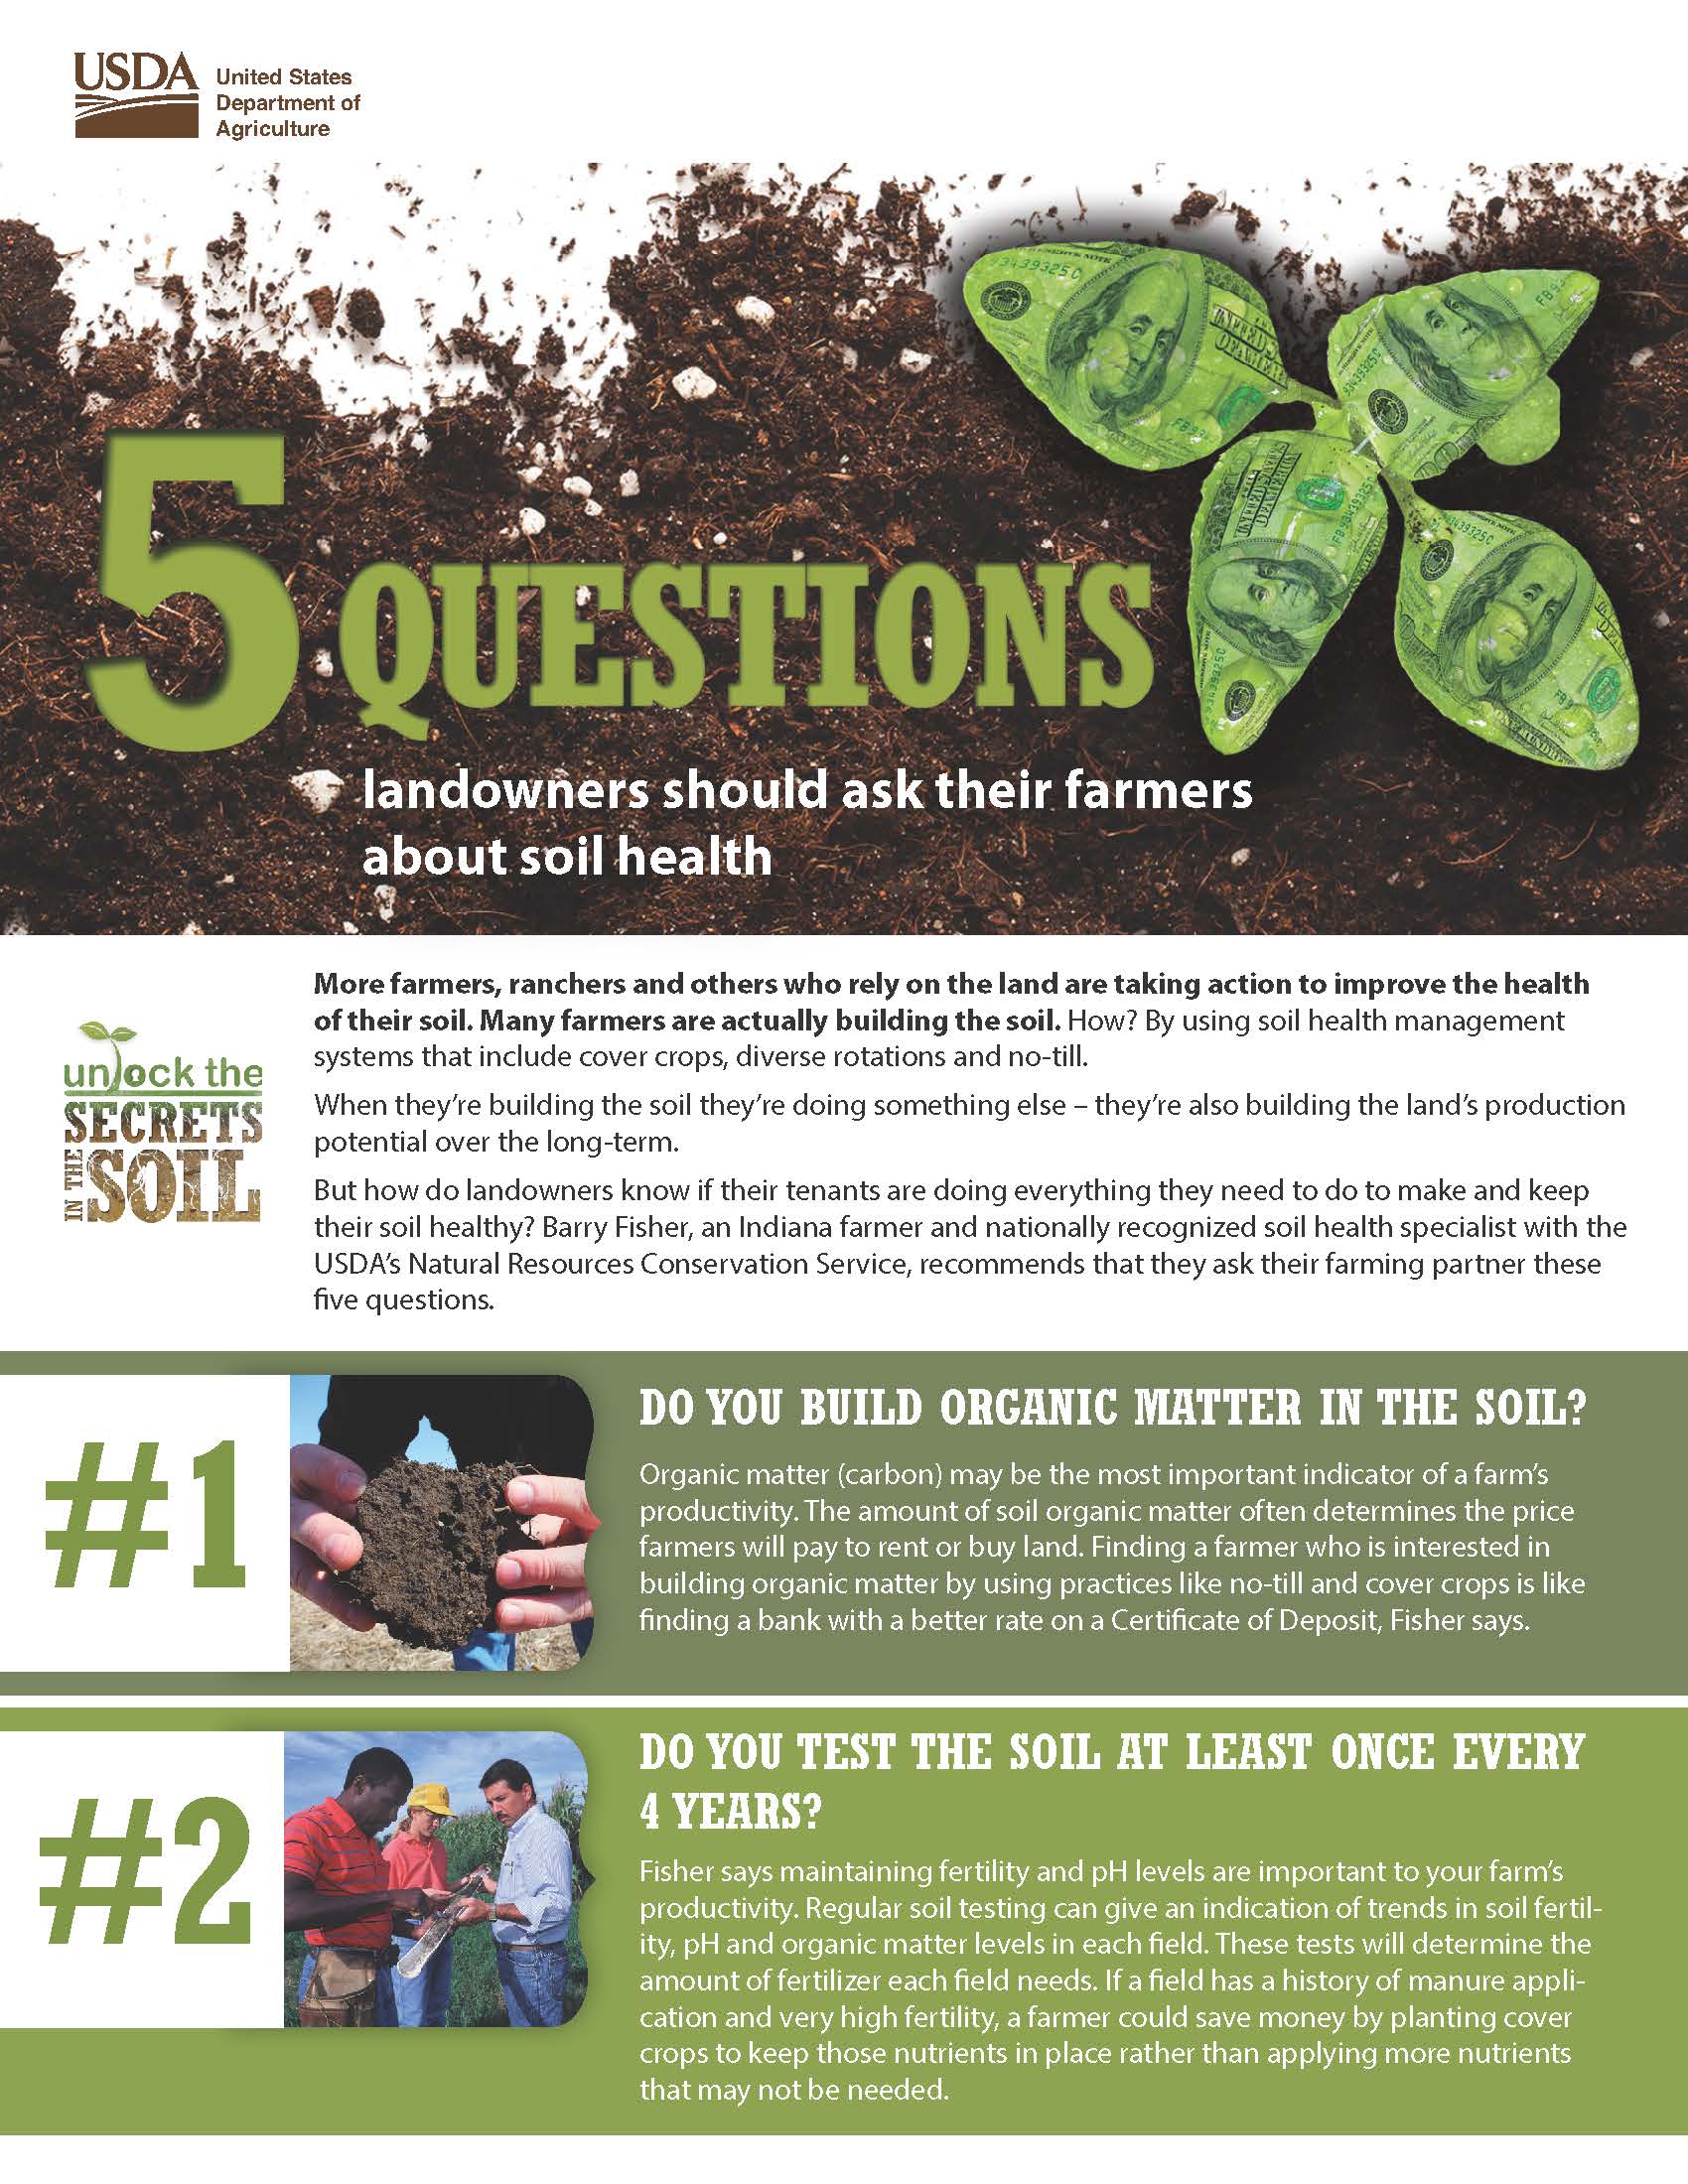 5 Questions for Soil Health